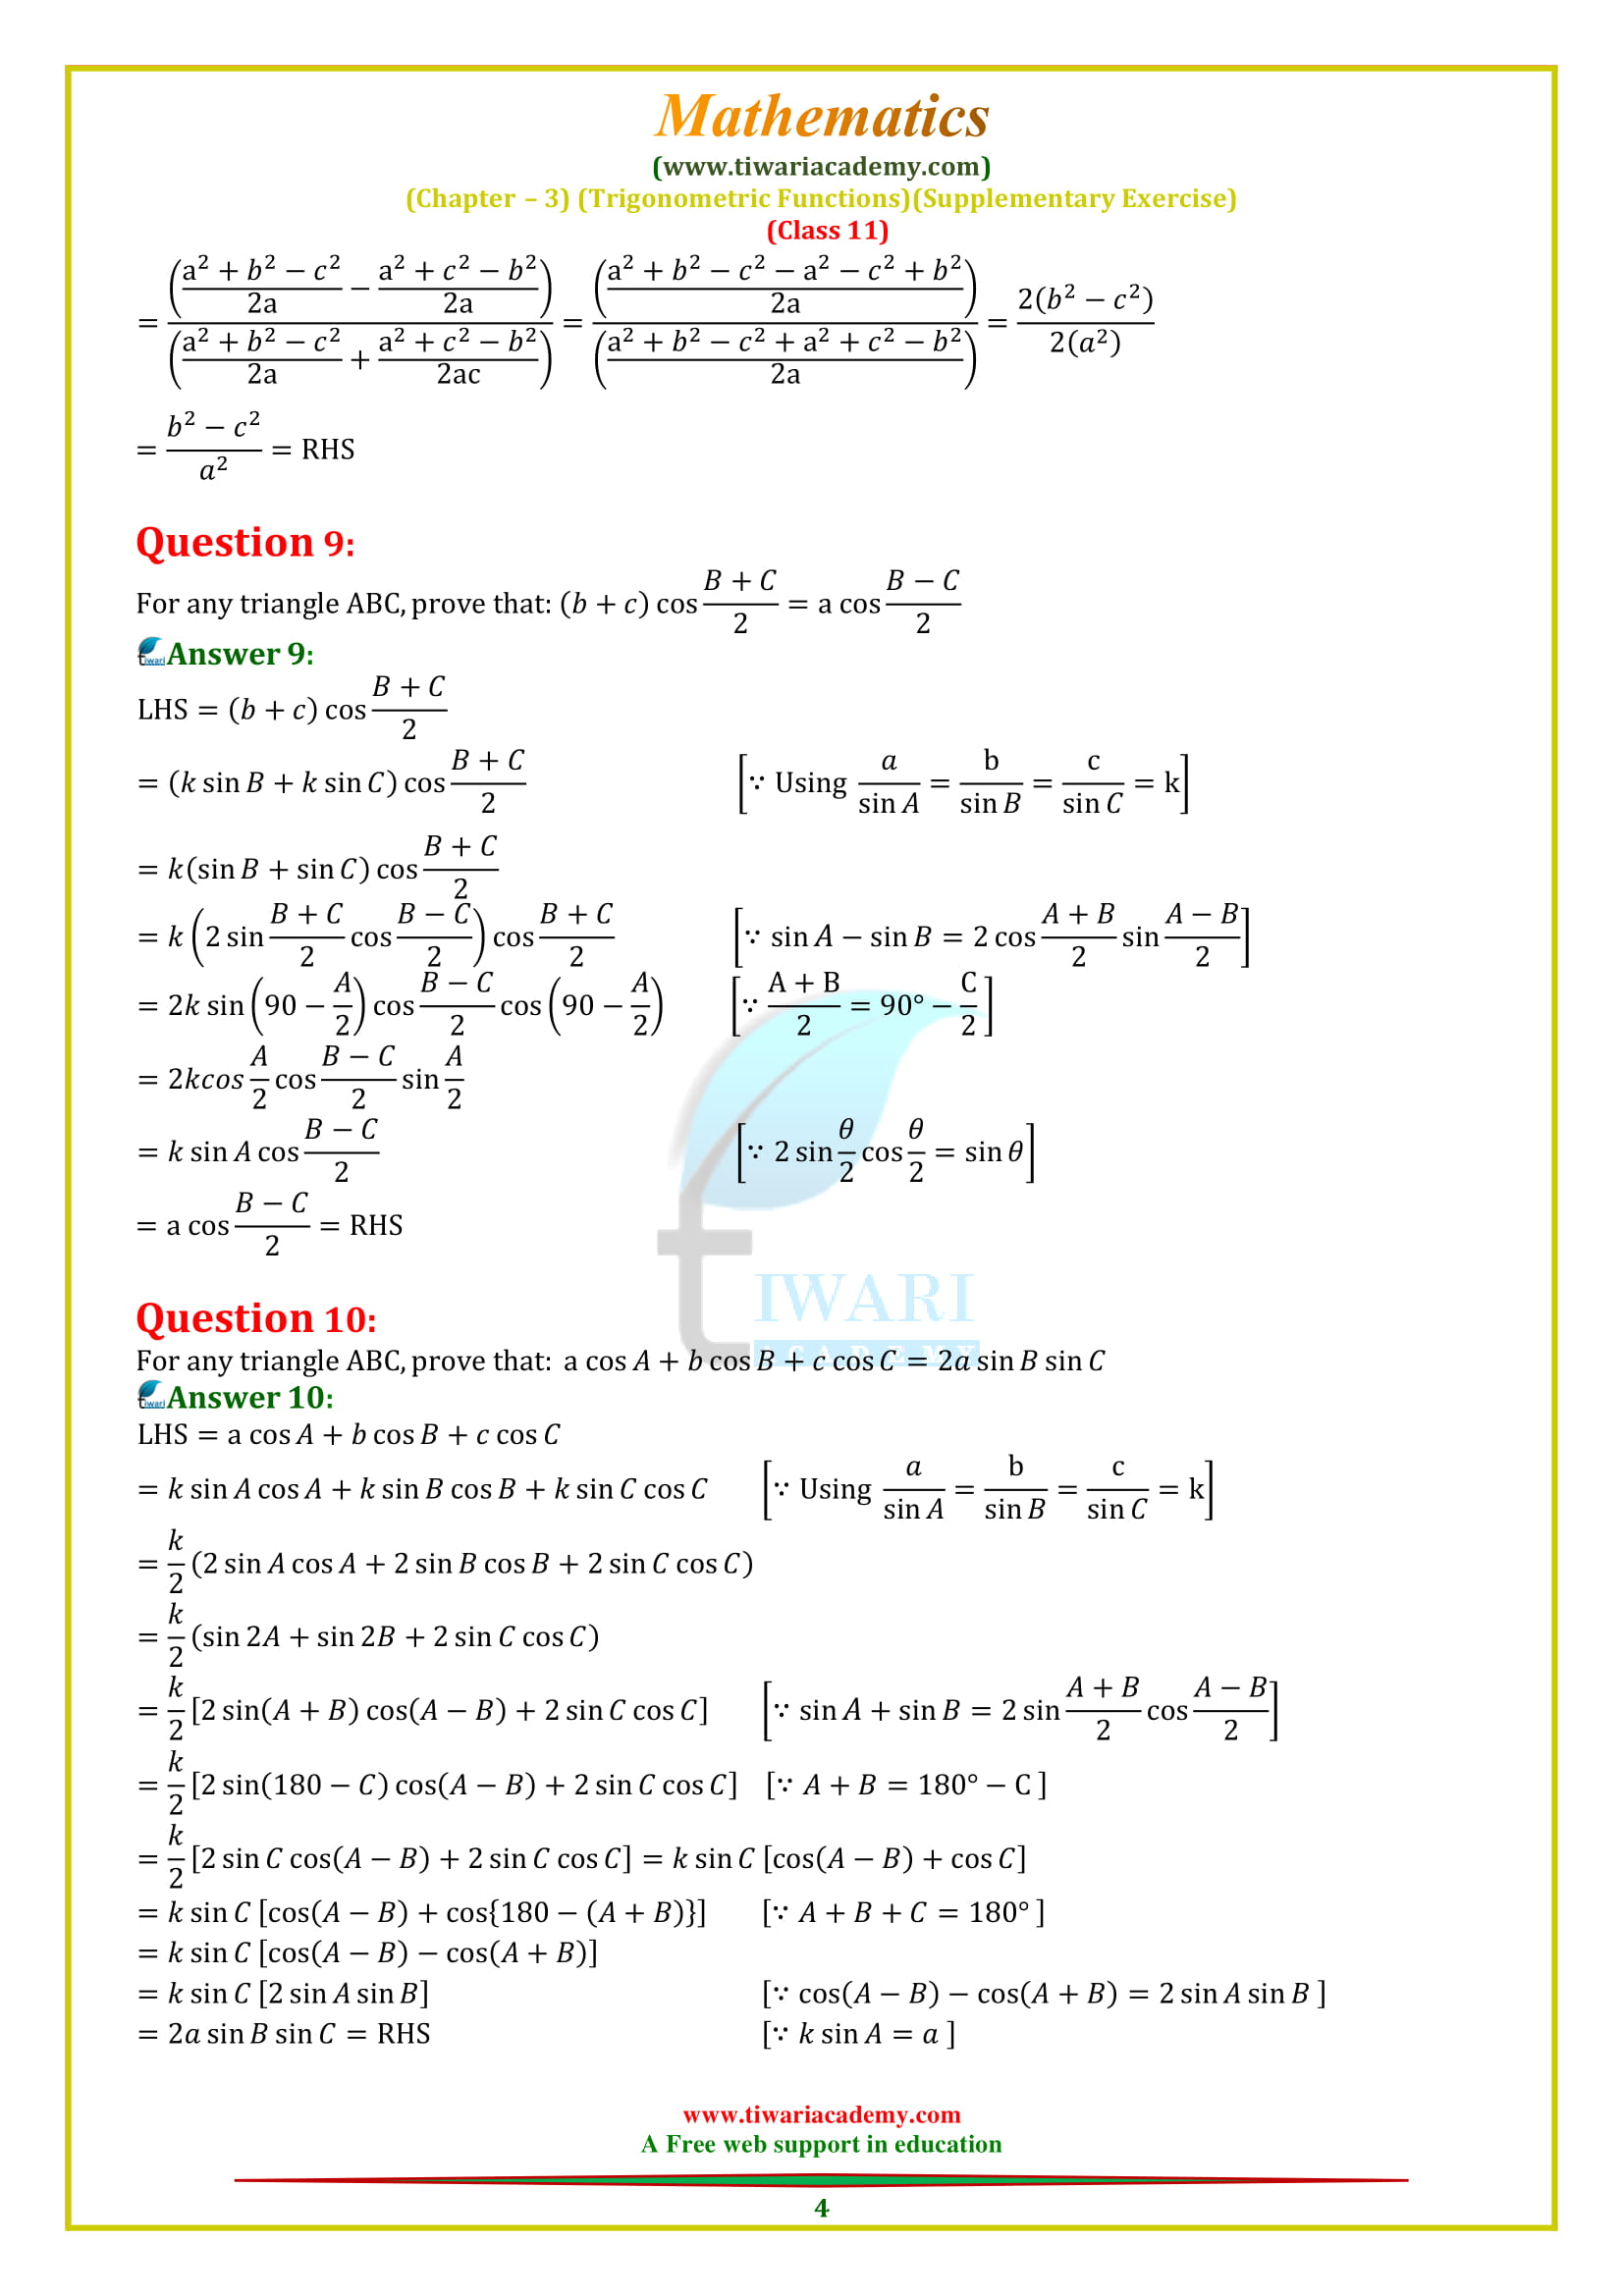 Class 11 Maths Chapter 3 Exercise 3.5 Supplementary question 6, 7, 8, 9, 10, 11, 12, 13